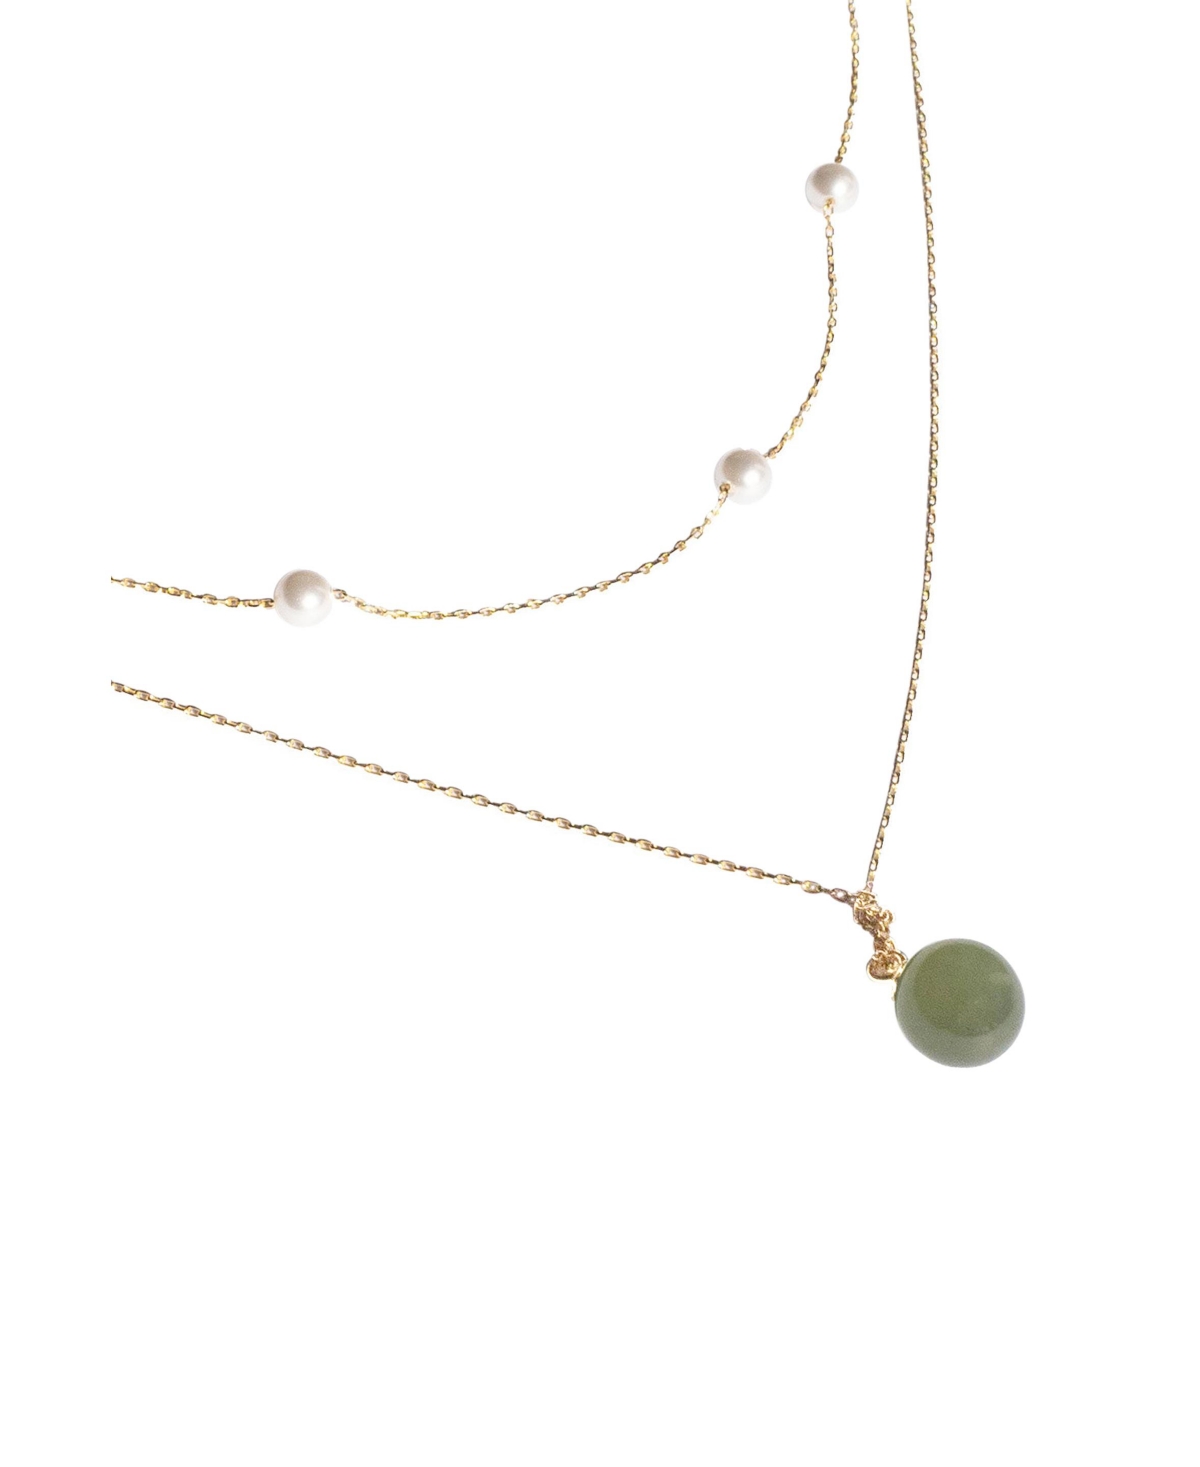 Emma - Pearl and jade layered necklace - Green